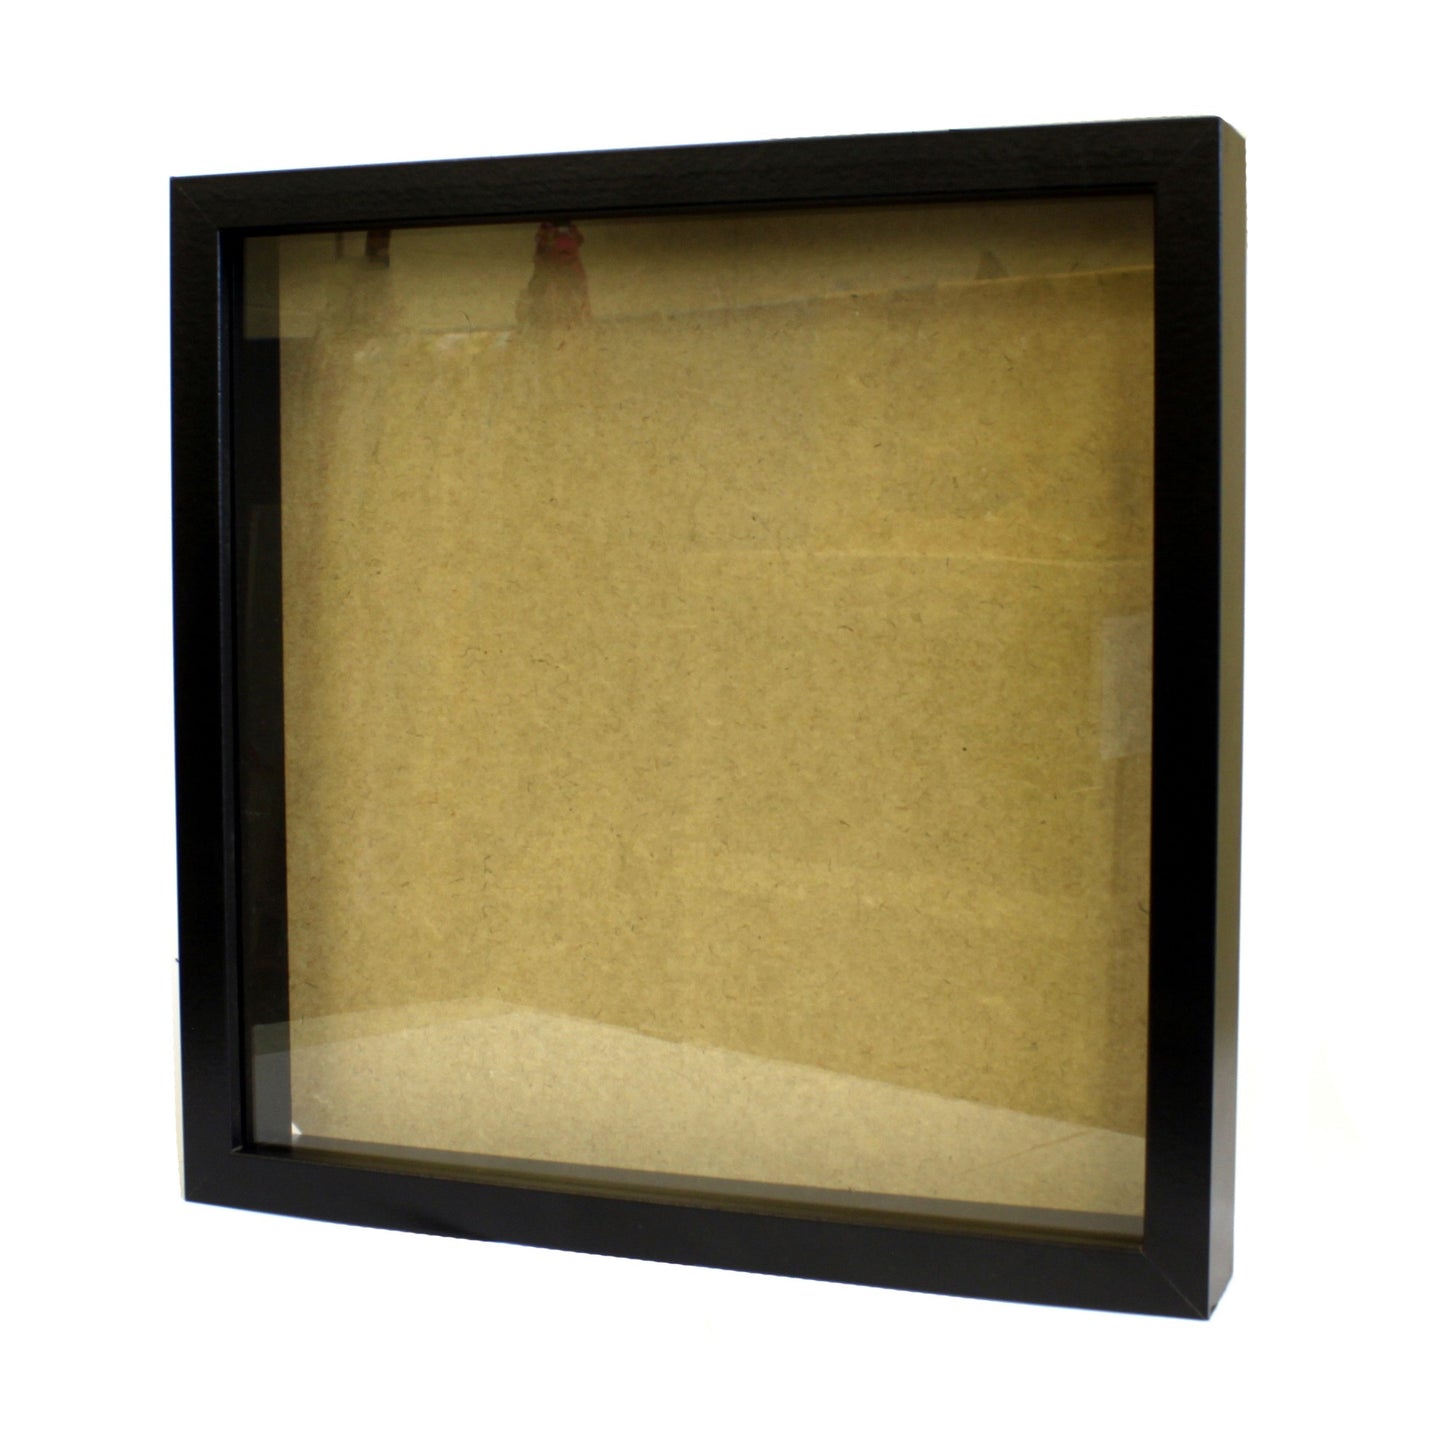 Black Deep Box Picture Frame 14x14 inch